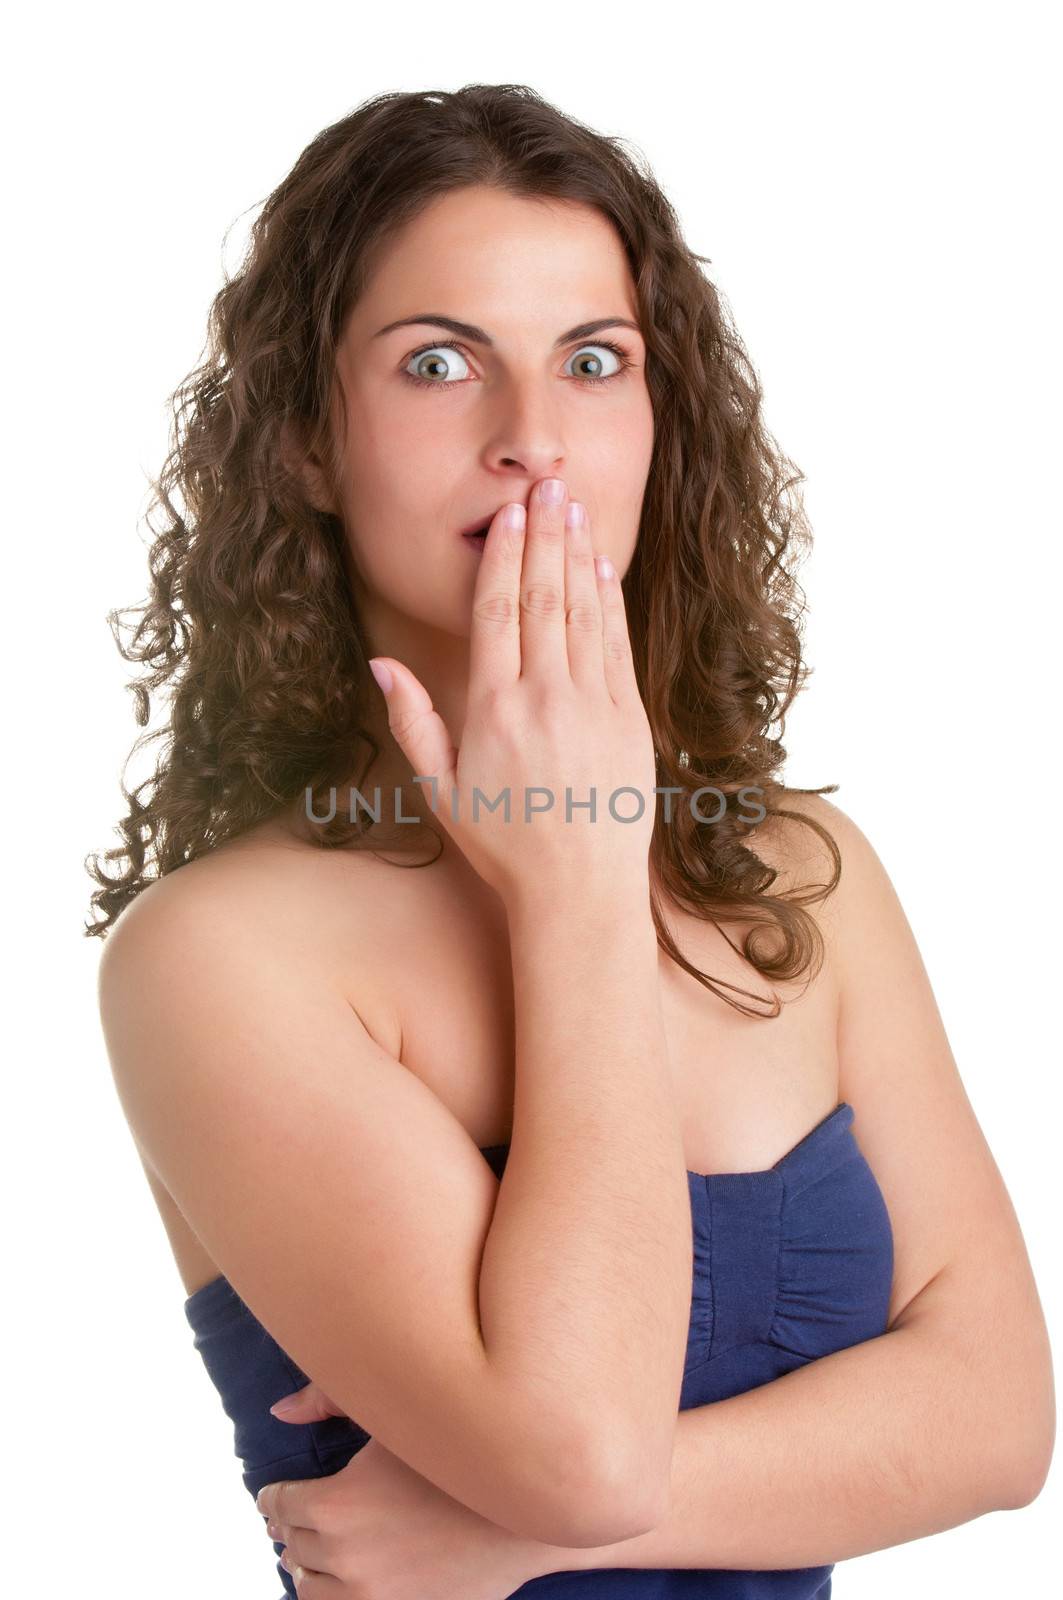 Shocked Woman Covering her Mouth with her hand, isolated in a white background